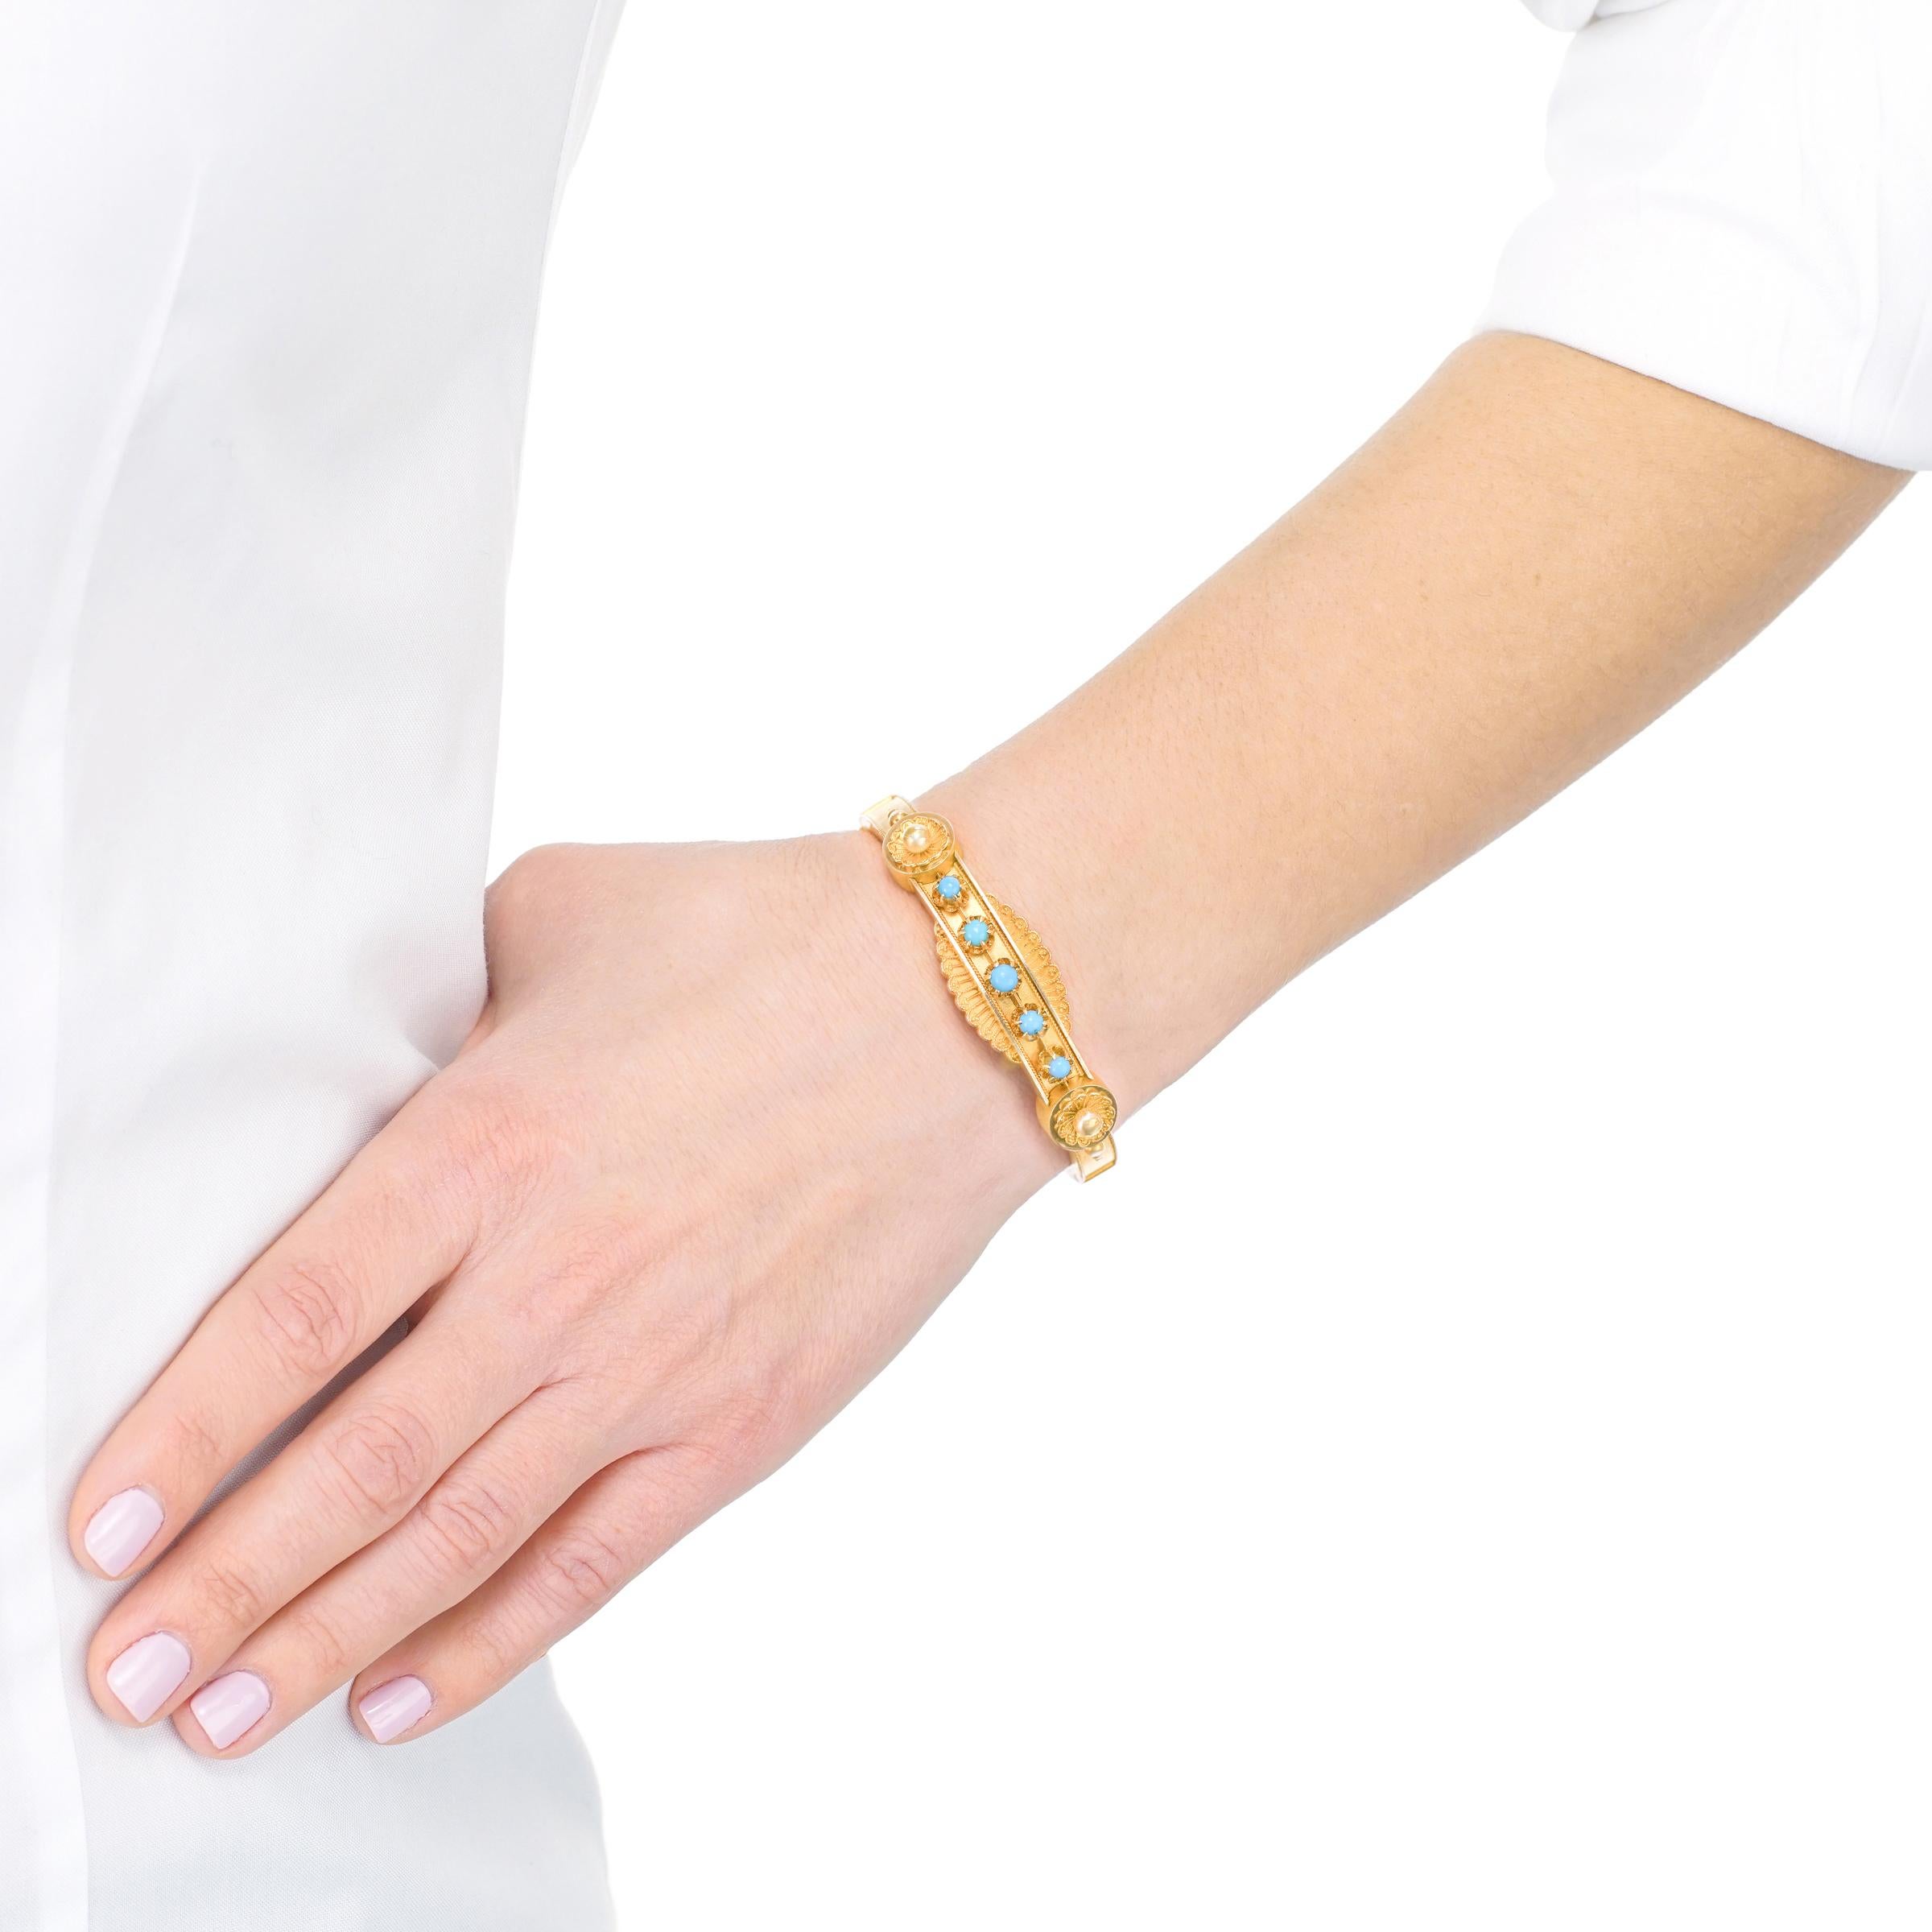 Circa 1880s, 14k, American.  This wearable bangle, borrowed from the Victorians, celebrates America's love affair with revival aesthetics. The look is wonderfully interpretive with a style centered on the Etruscan taste.  Perfect for any moment of